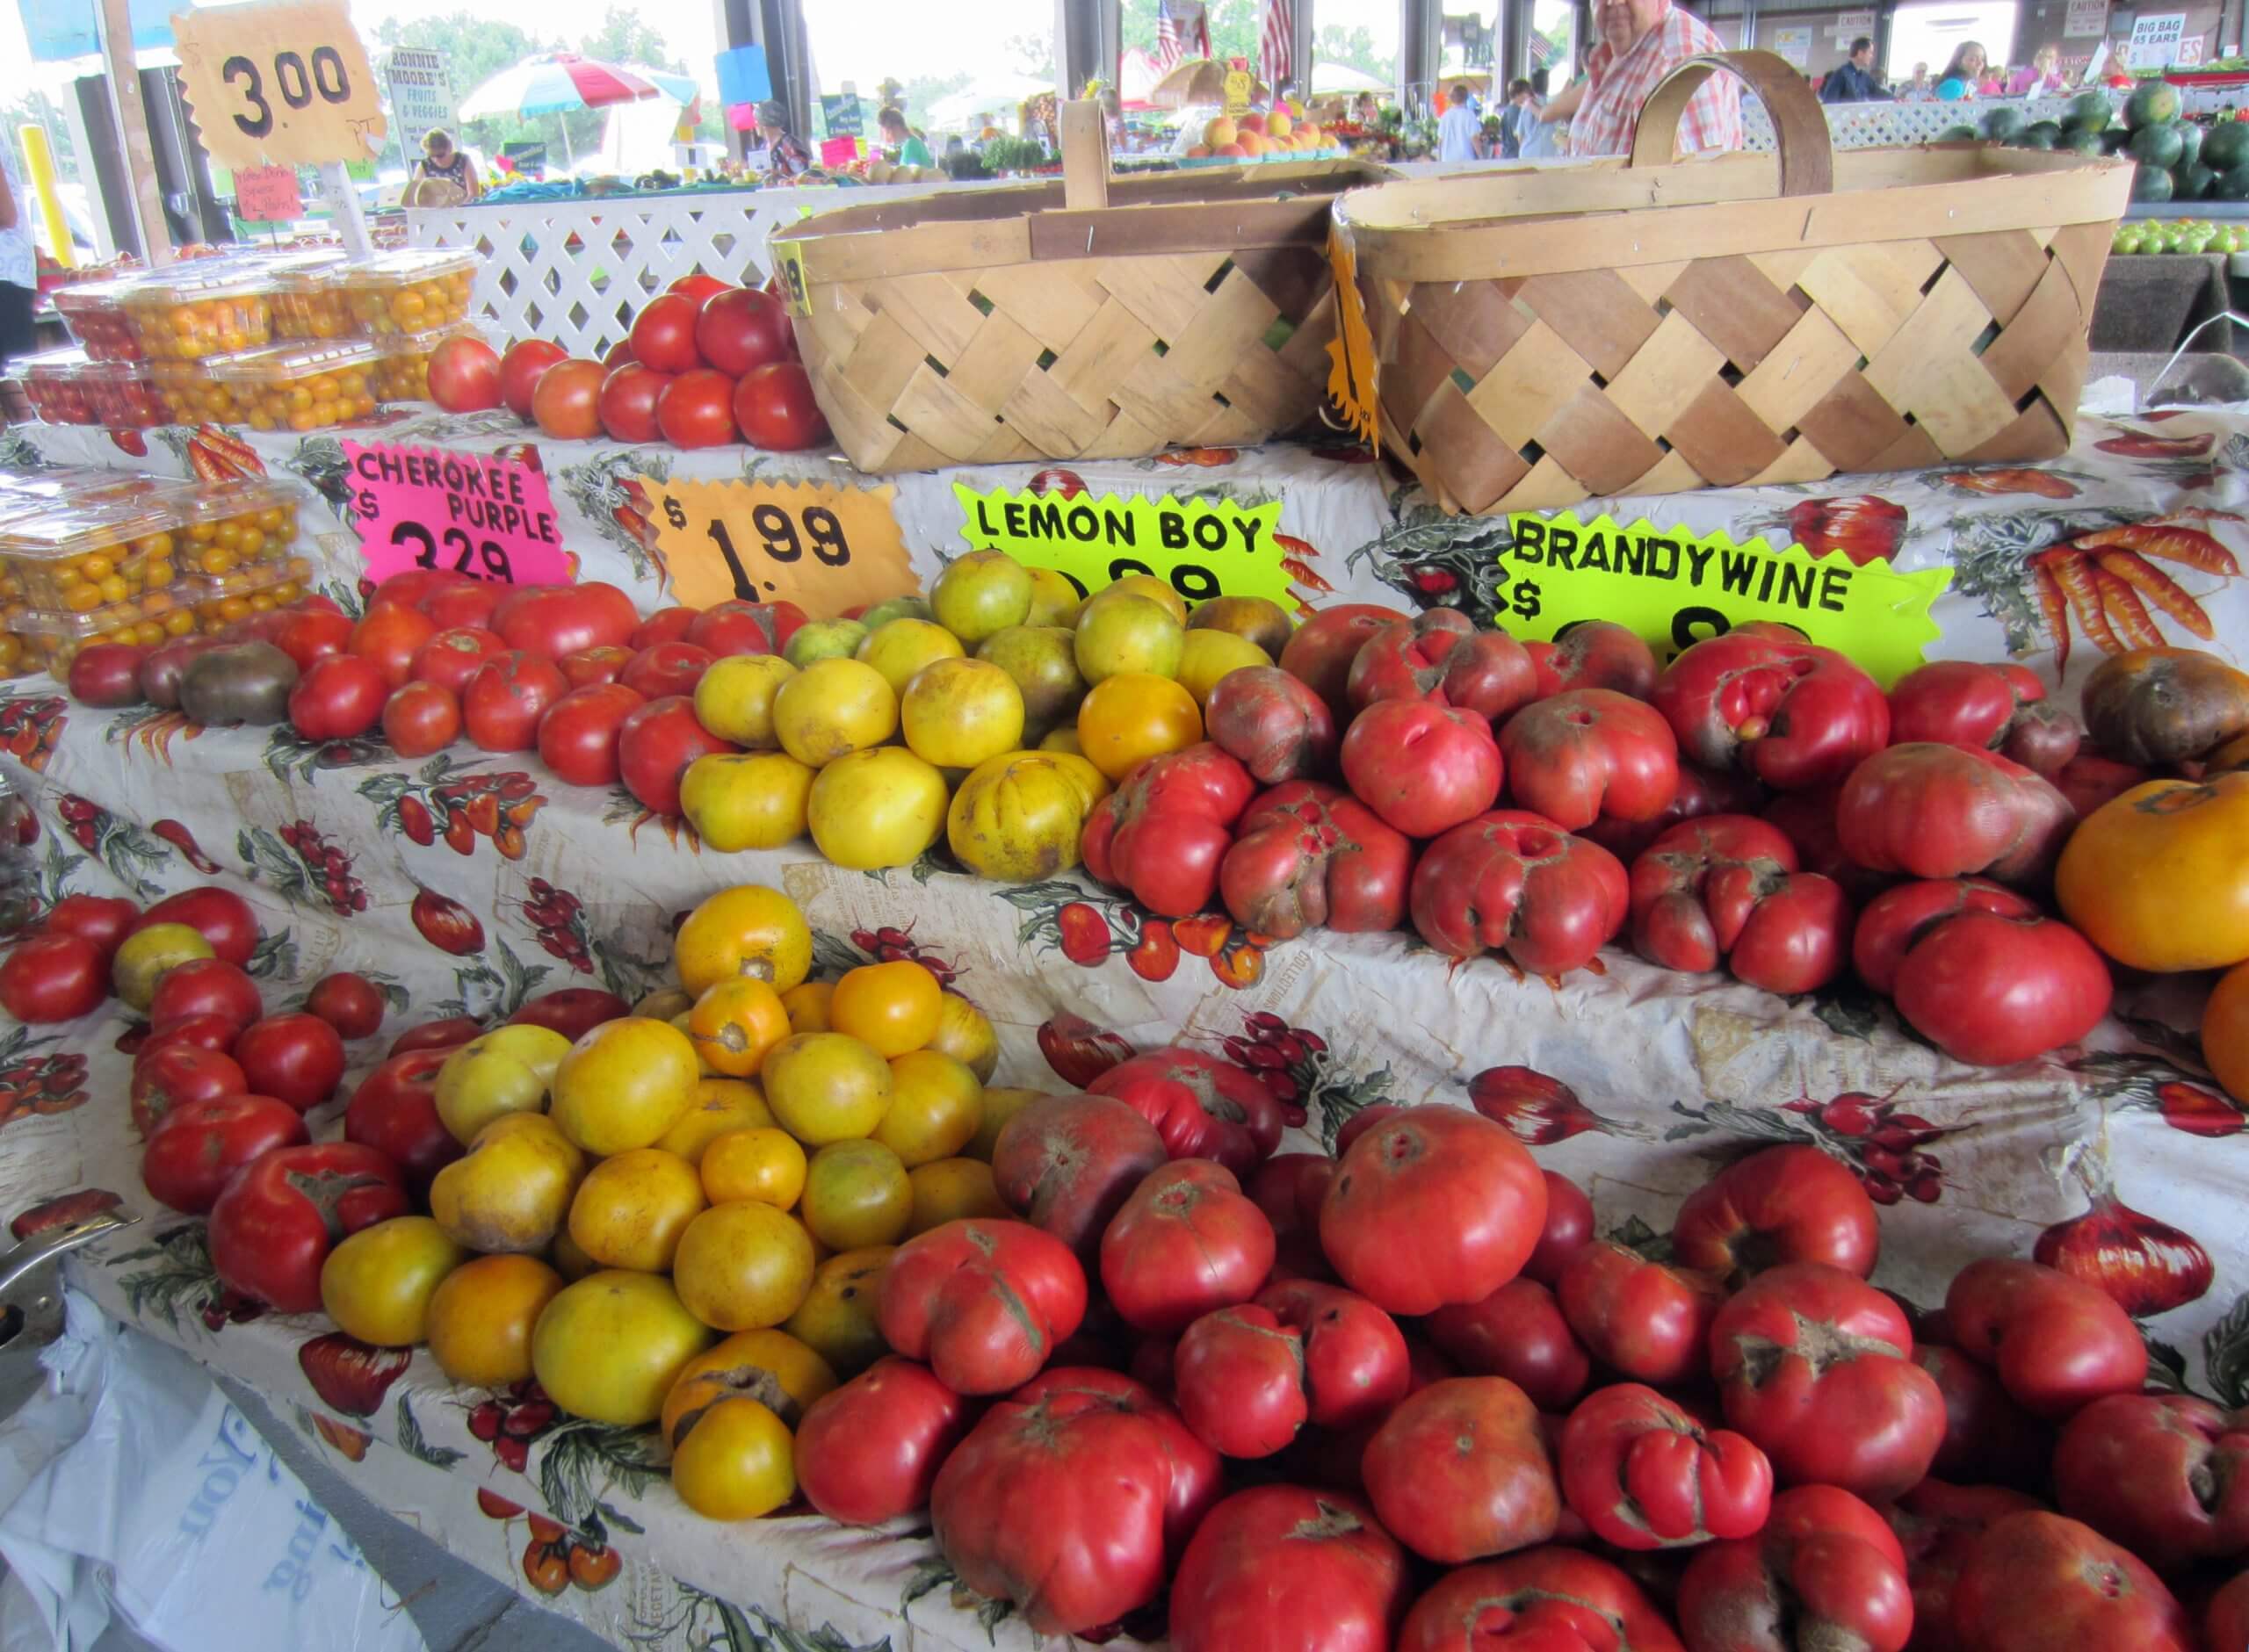 Heirloom tomatoes are always popular at the North Carolina State Farmer's Market in Raleigh.